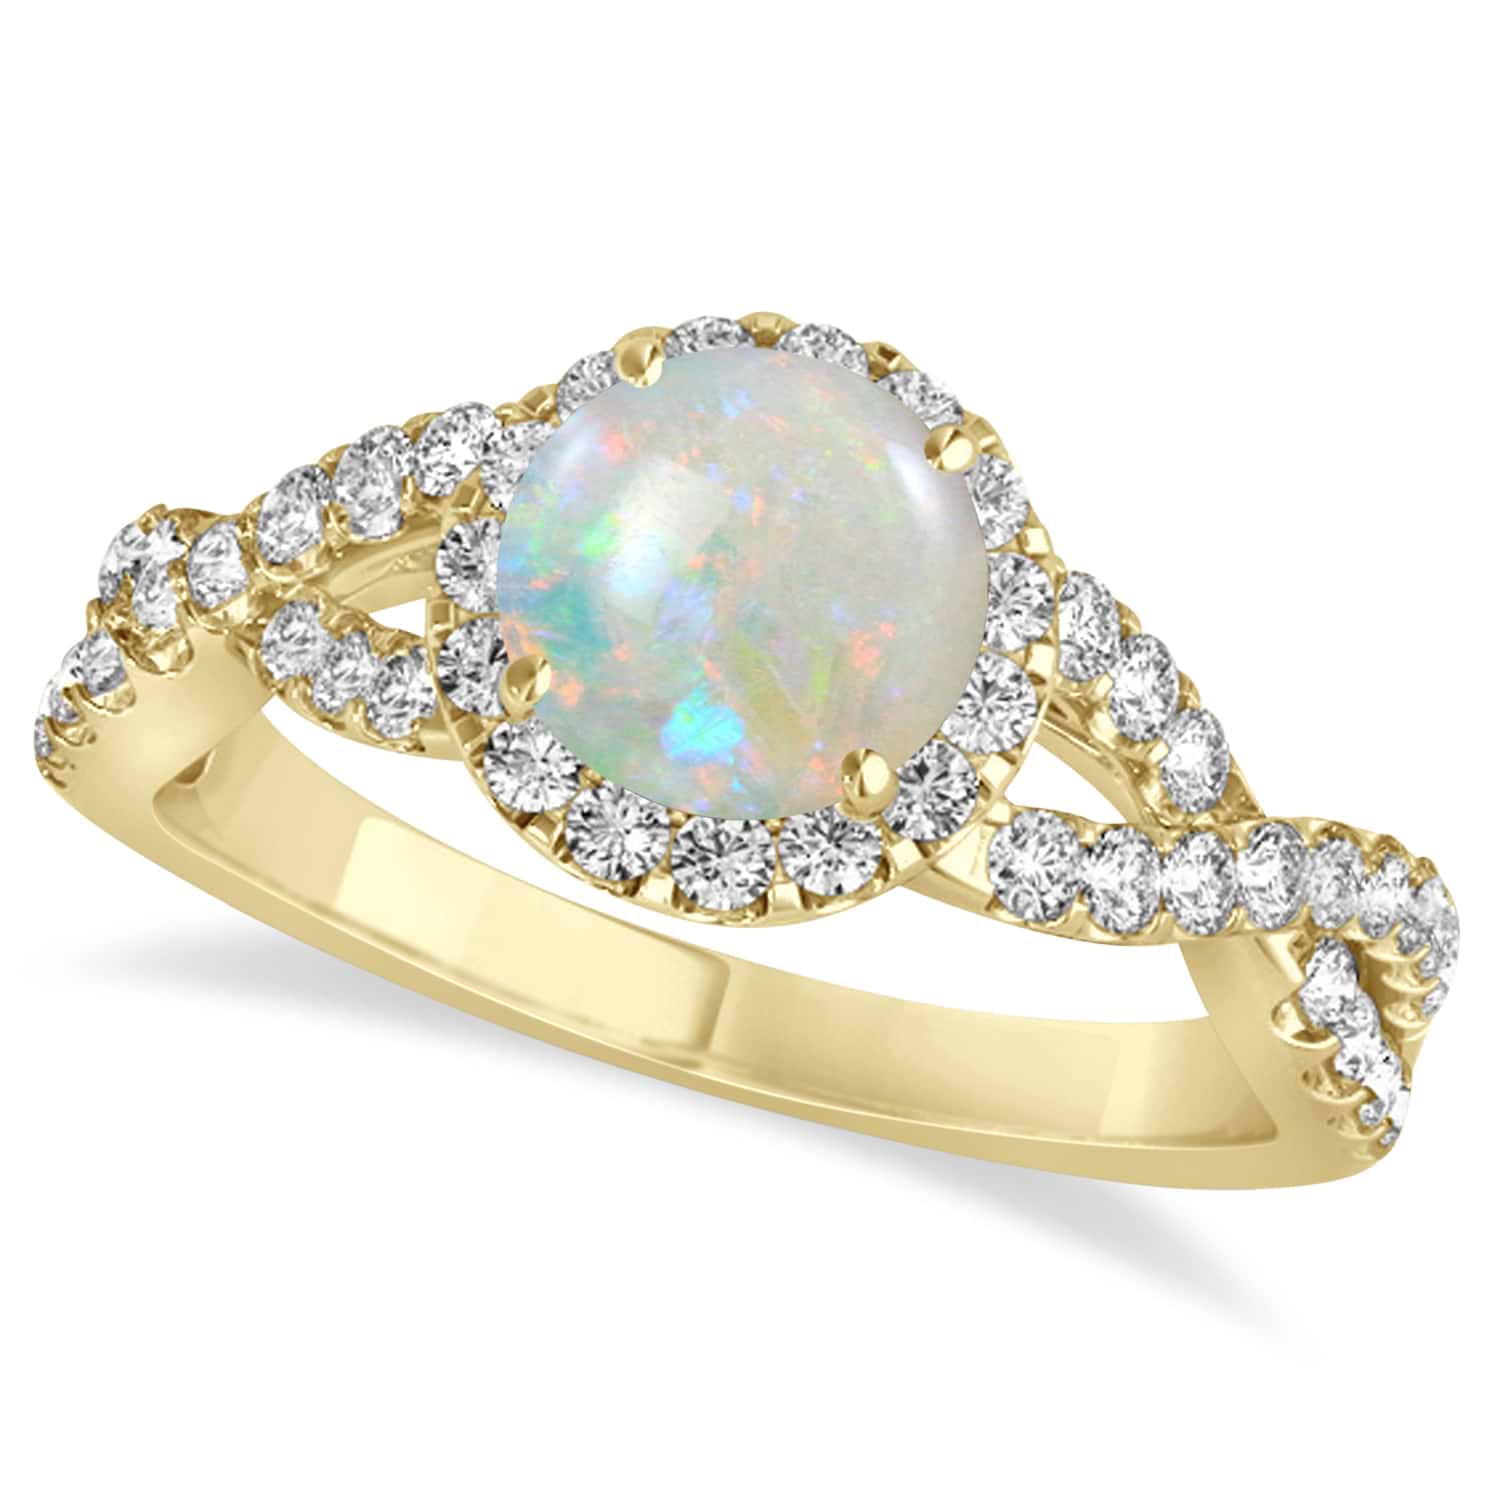 Opal & Diamond Twisted Engagement Ring 14k Yellow Gold 1.07ct